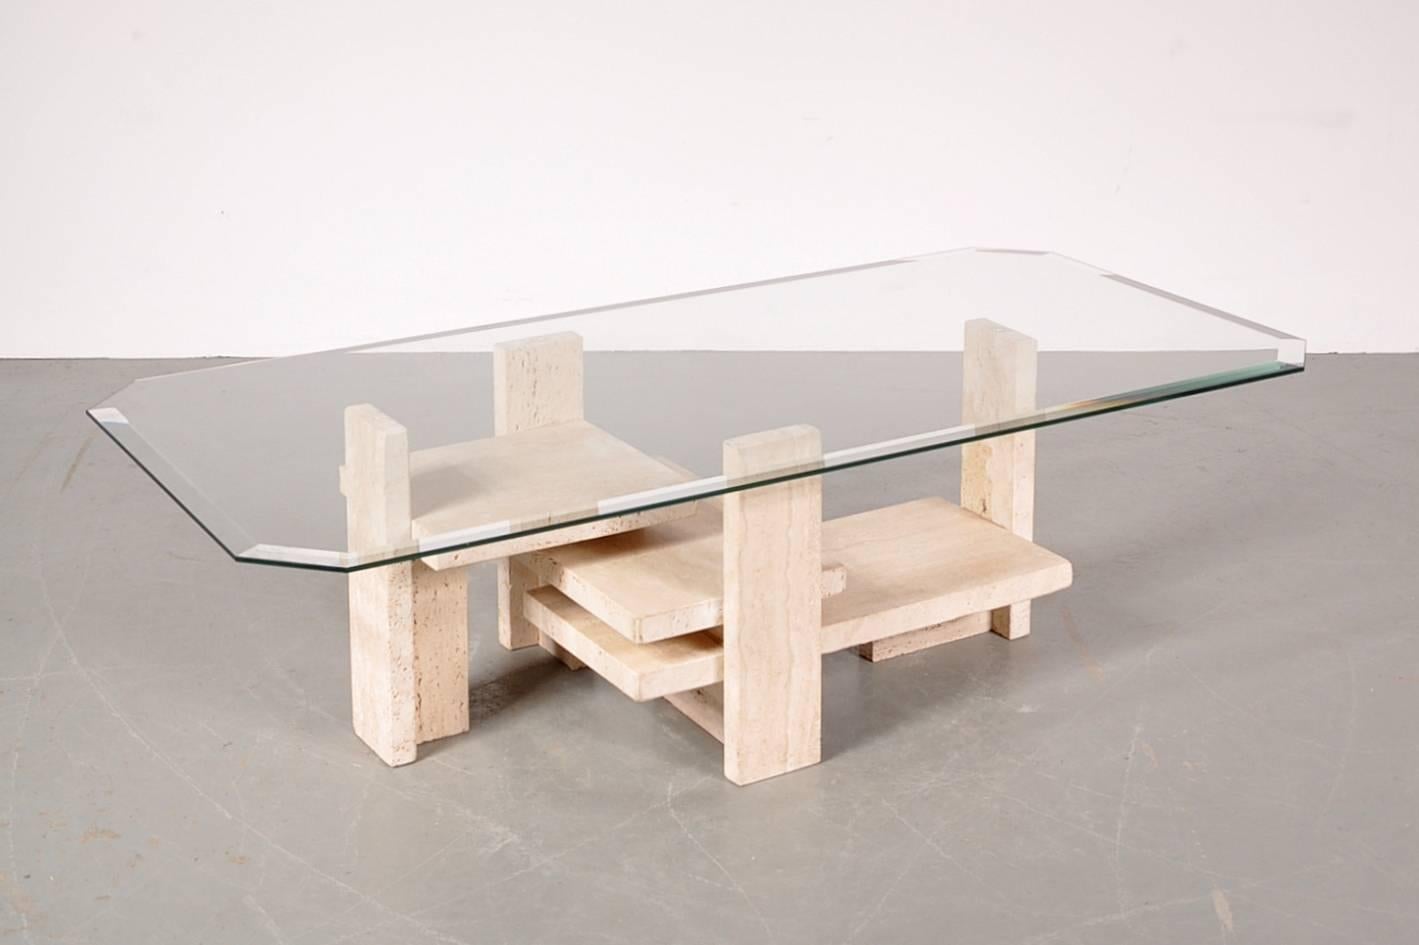 Amazing sculptural coffee table by Belgian artist Willy Ballez, circa 1980.

This unique piece has a high quality, sculptural design travertine base with a beautiful quality glass top. It would make a true eyecatcher in any modern interior.

In